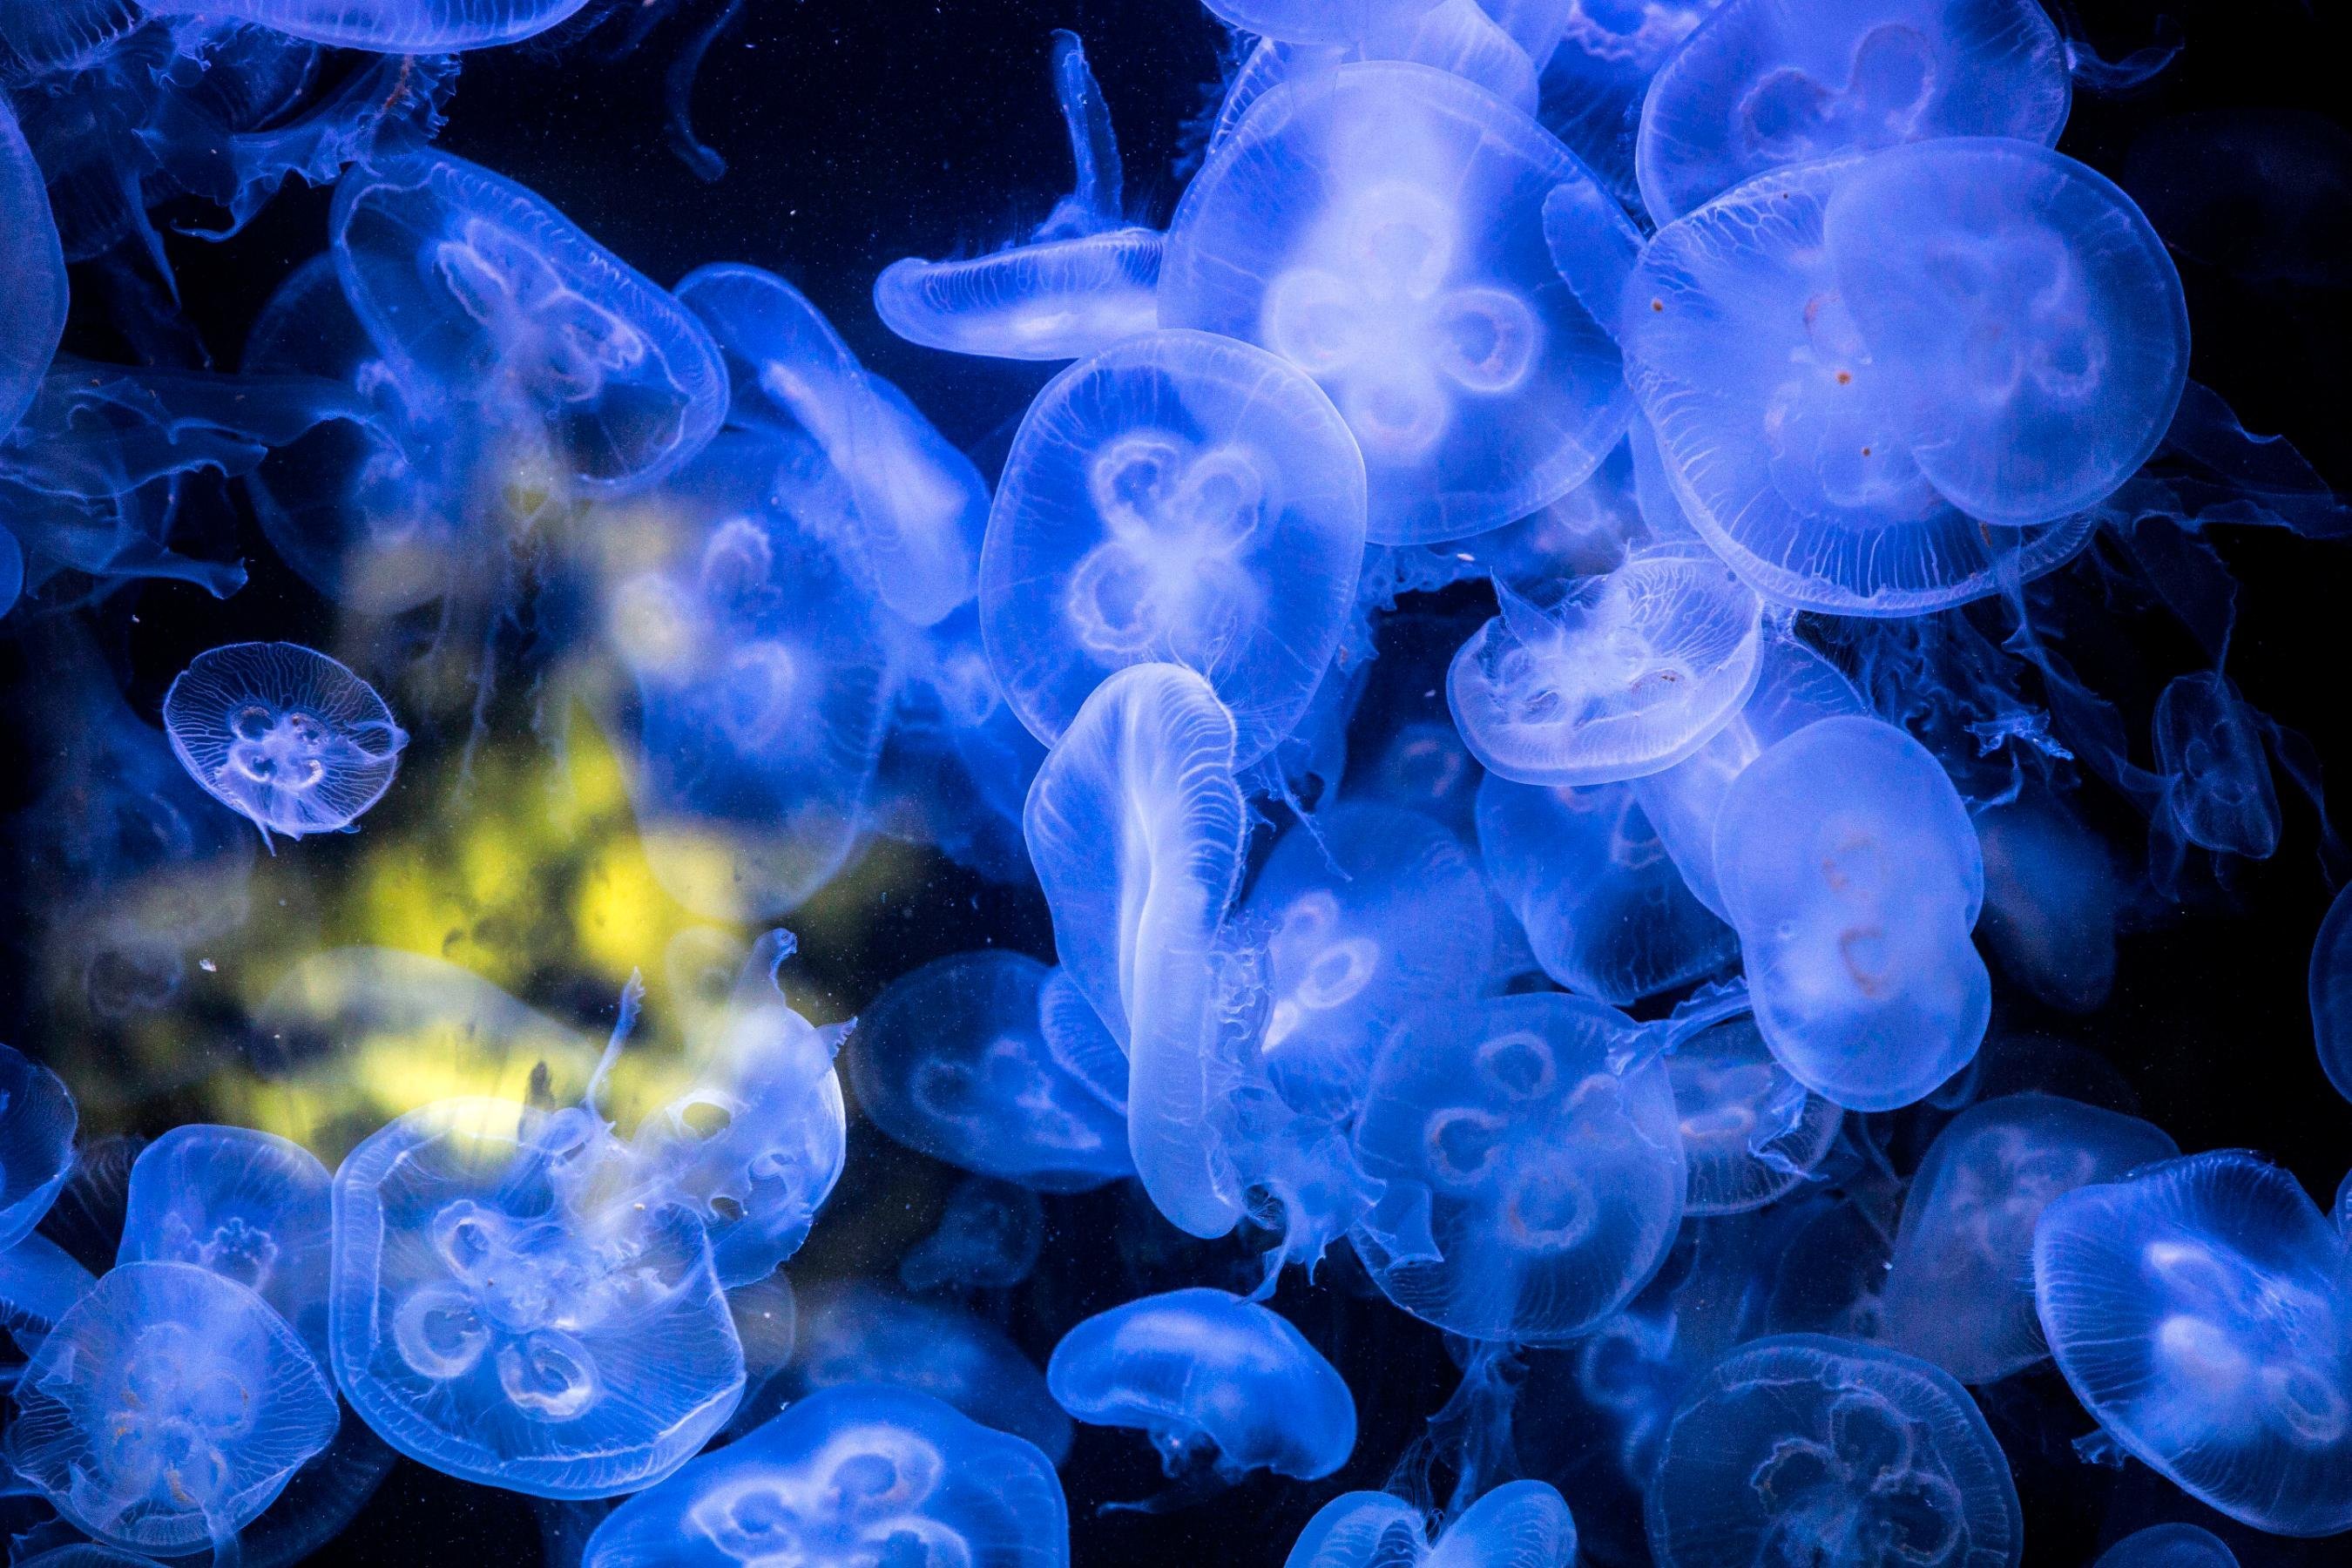 What Do Moon Jellyfish Eat